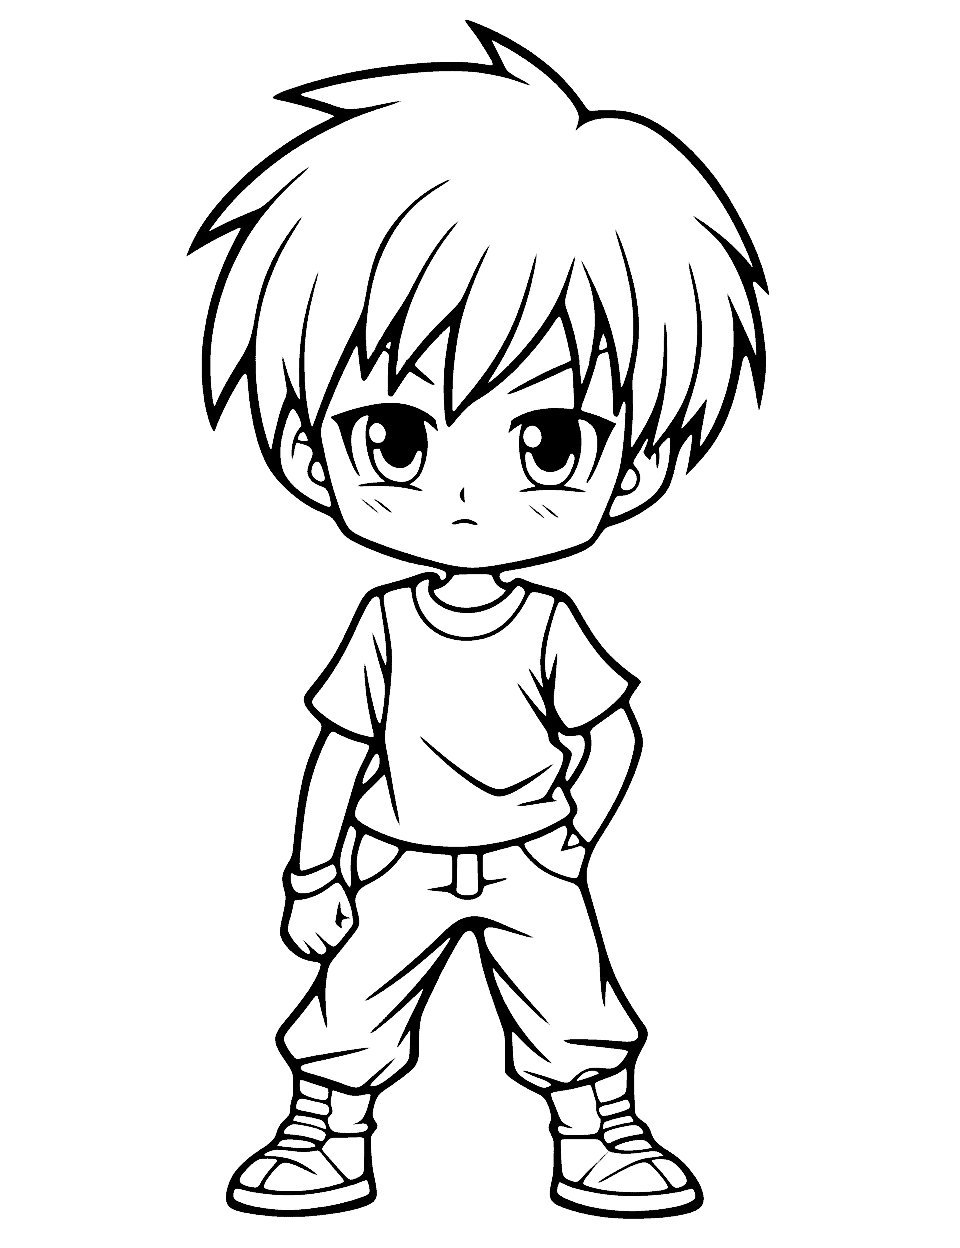 Top 20 Free Printable Anime Coloring Pages Online-demhanvico.com.vn